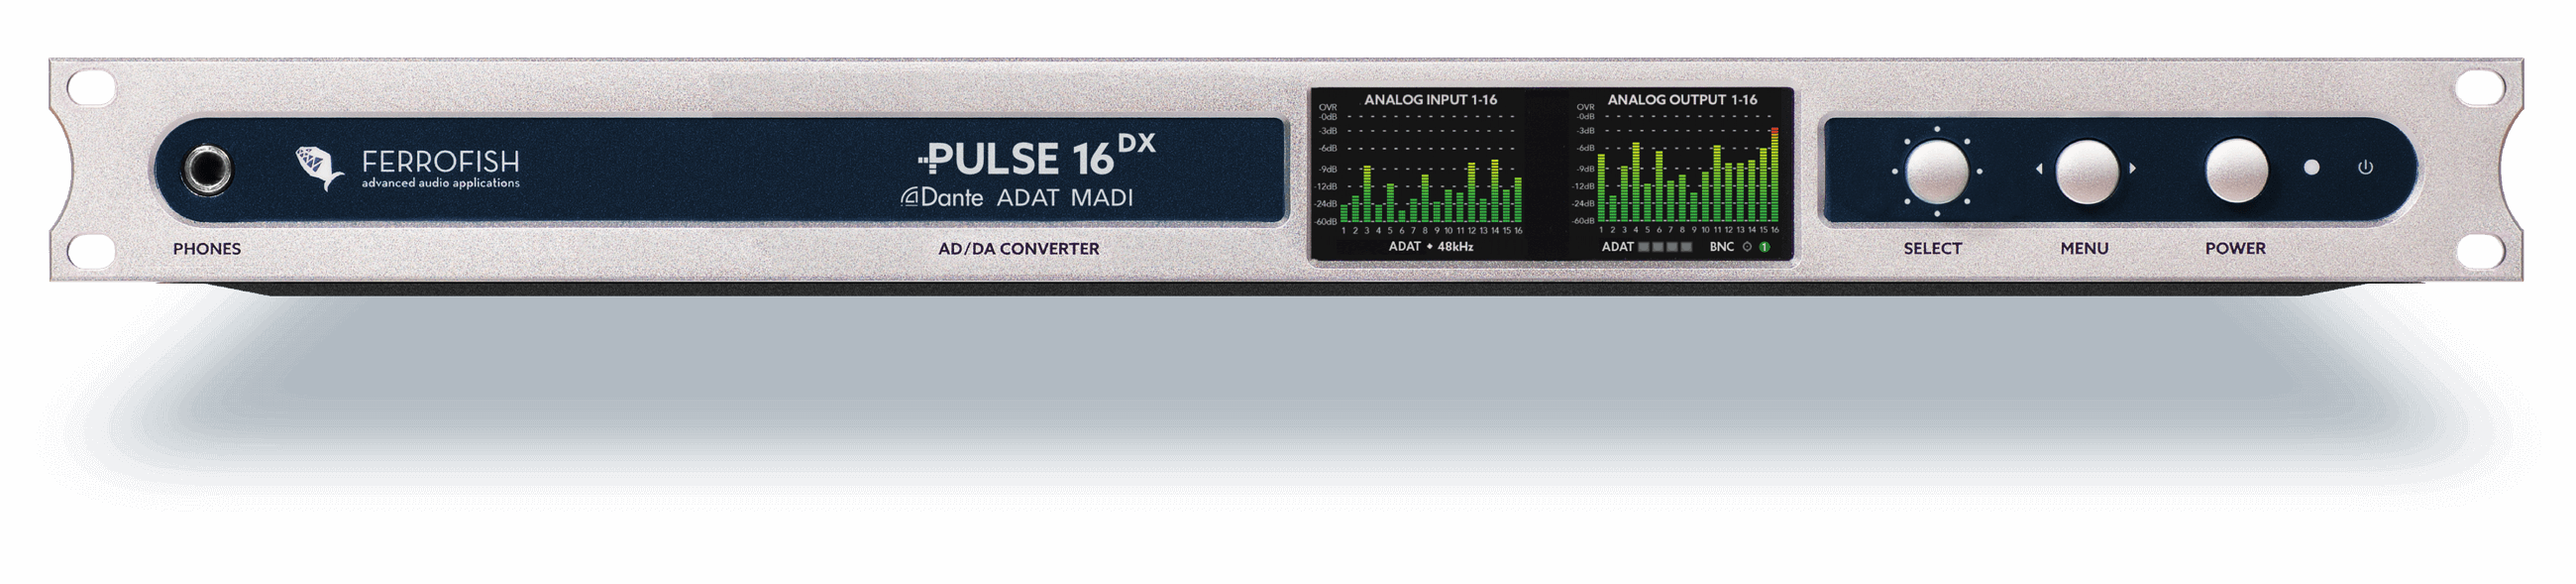 Ferrofish Pulse 16 DX - 16 in / 16 out AD/DA converter with ADAT, MADI and Dante